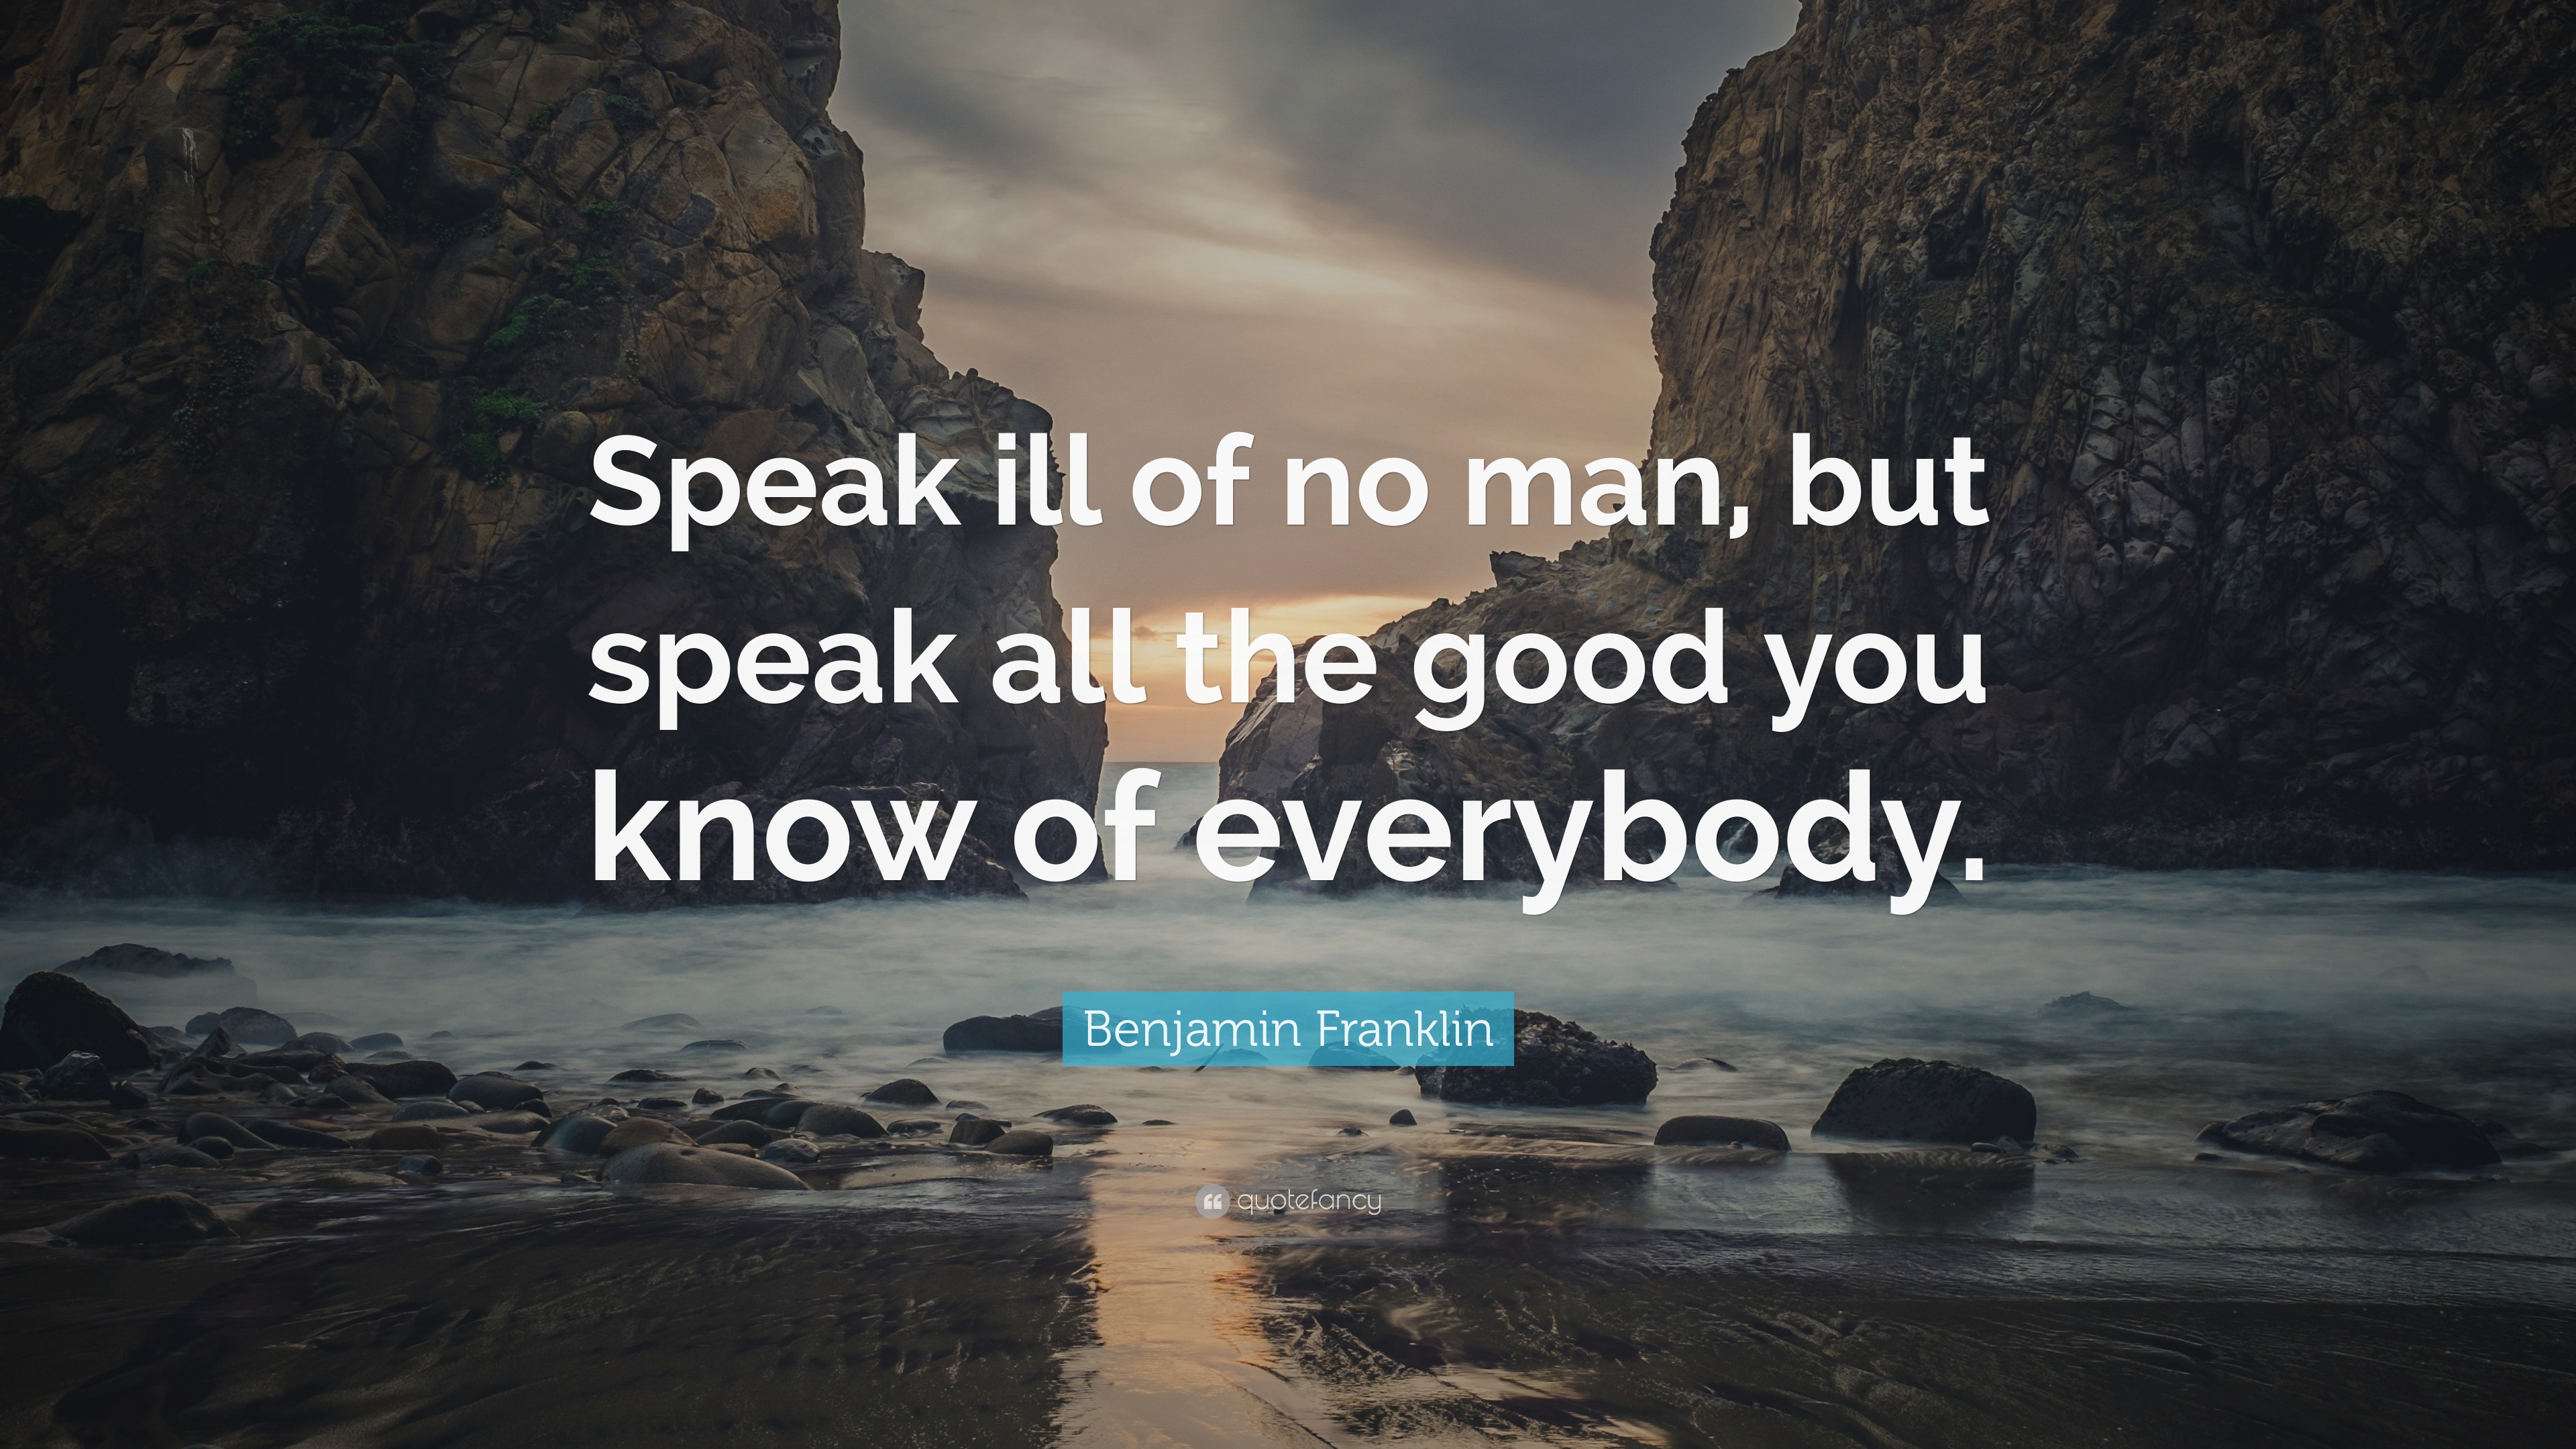 Benjamin Franklin Quote: "Speak ill of no man, but speak all the good you...